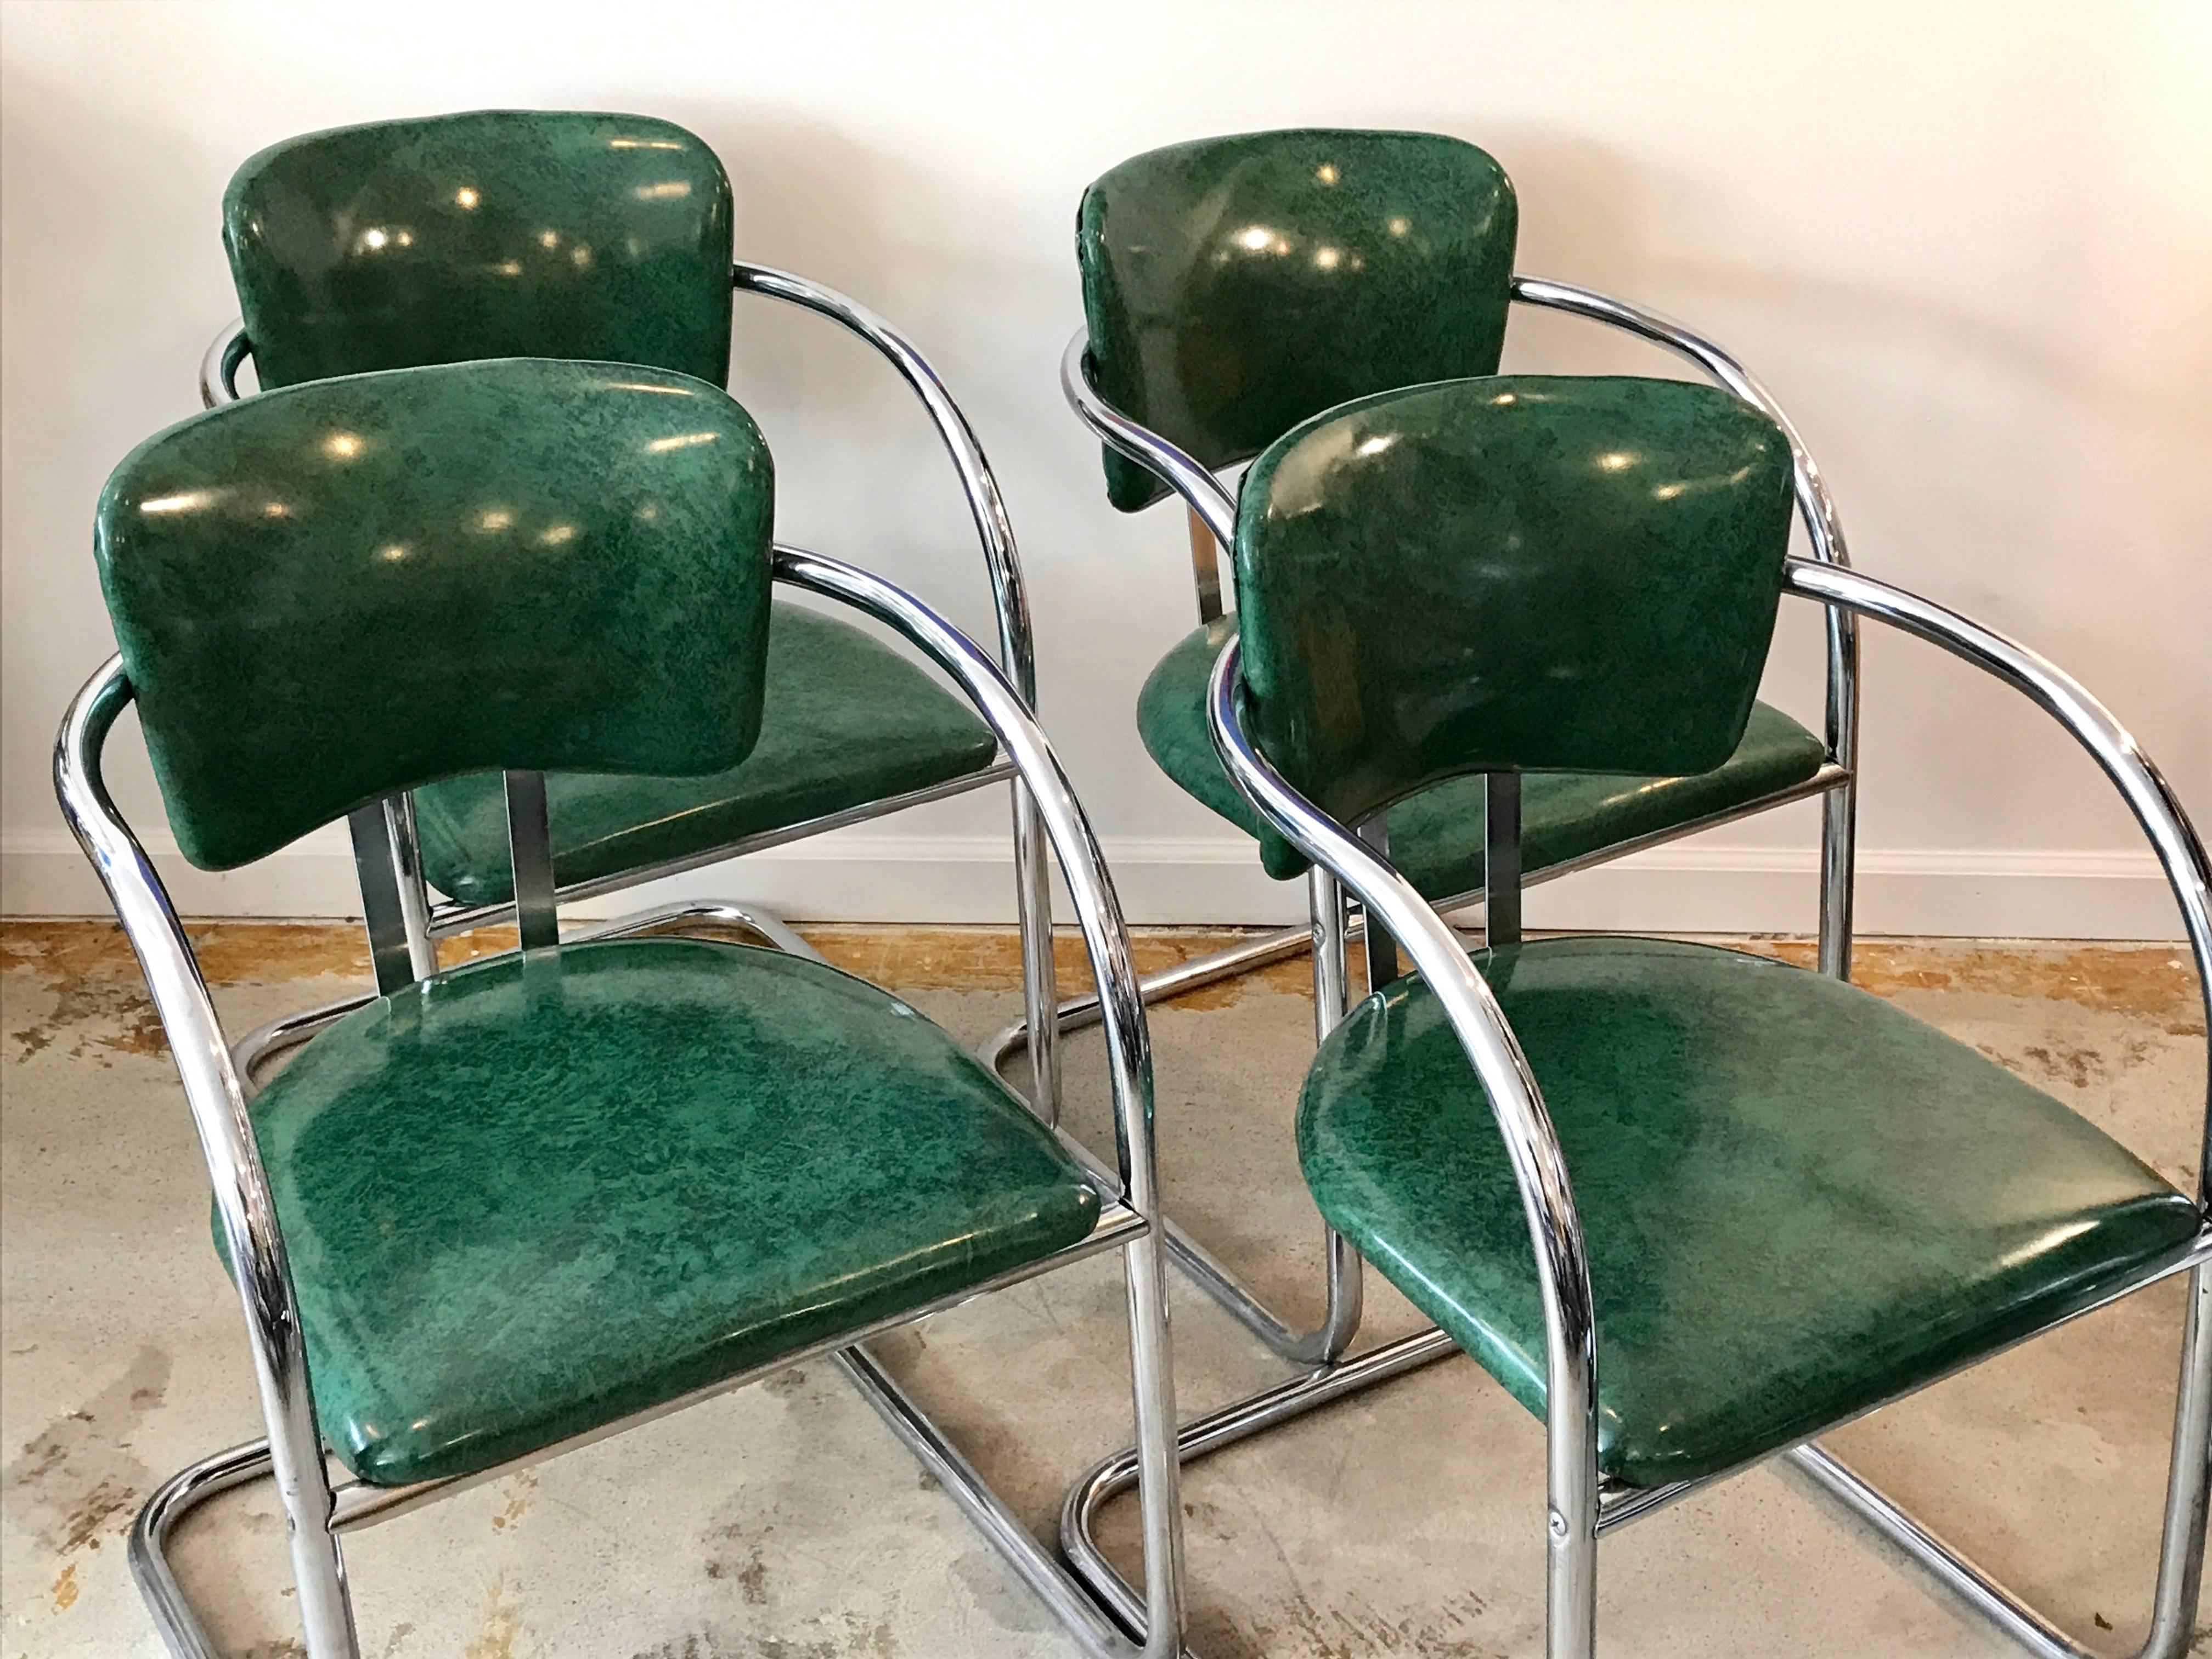 Awesome set of four tubular chrome cantilevered dining armchairs with grass green vinyl padded seats and backs. This Classic 1930's streamline modern design is characteristic of the works by KEM Weber.